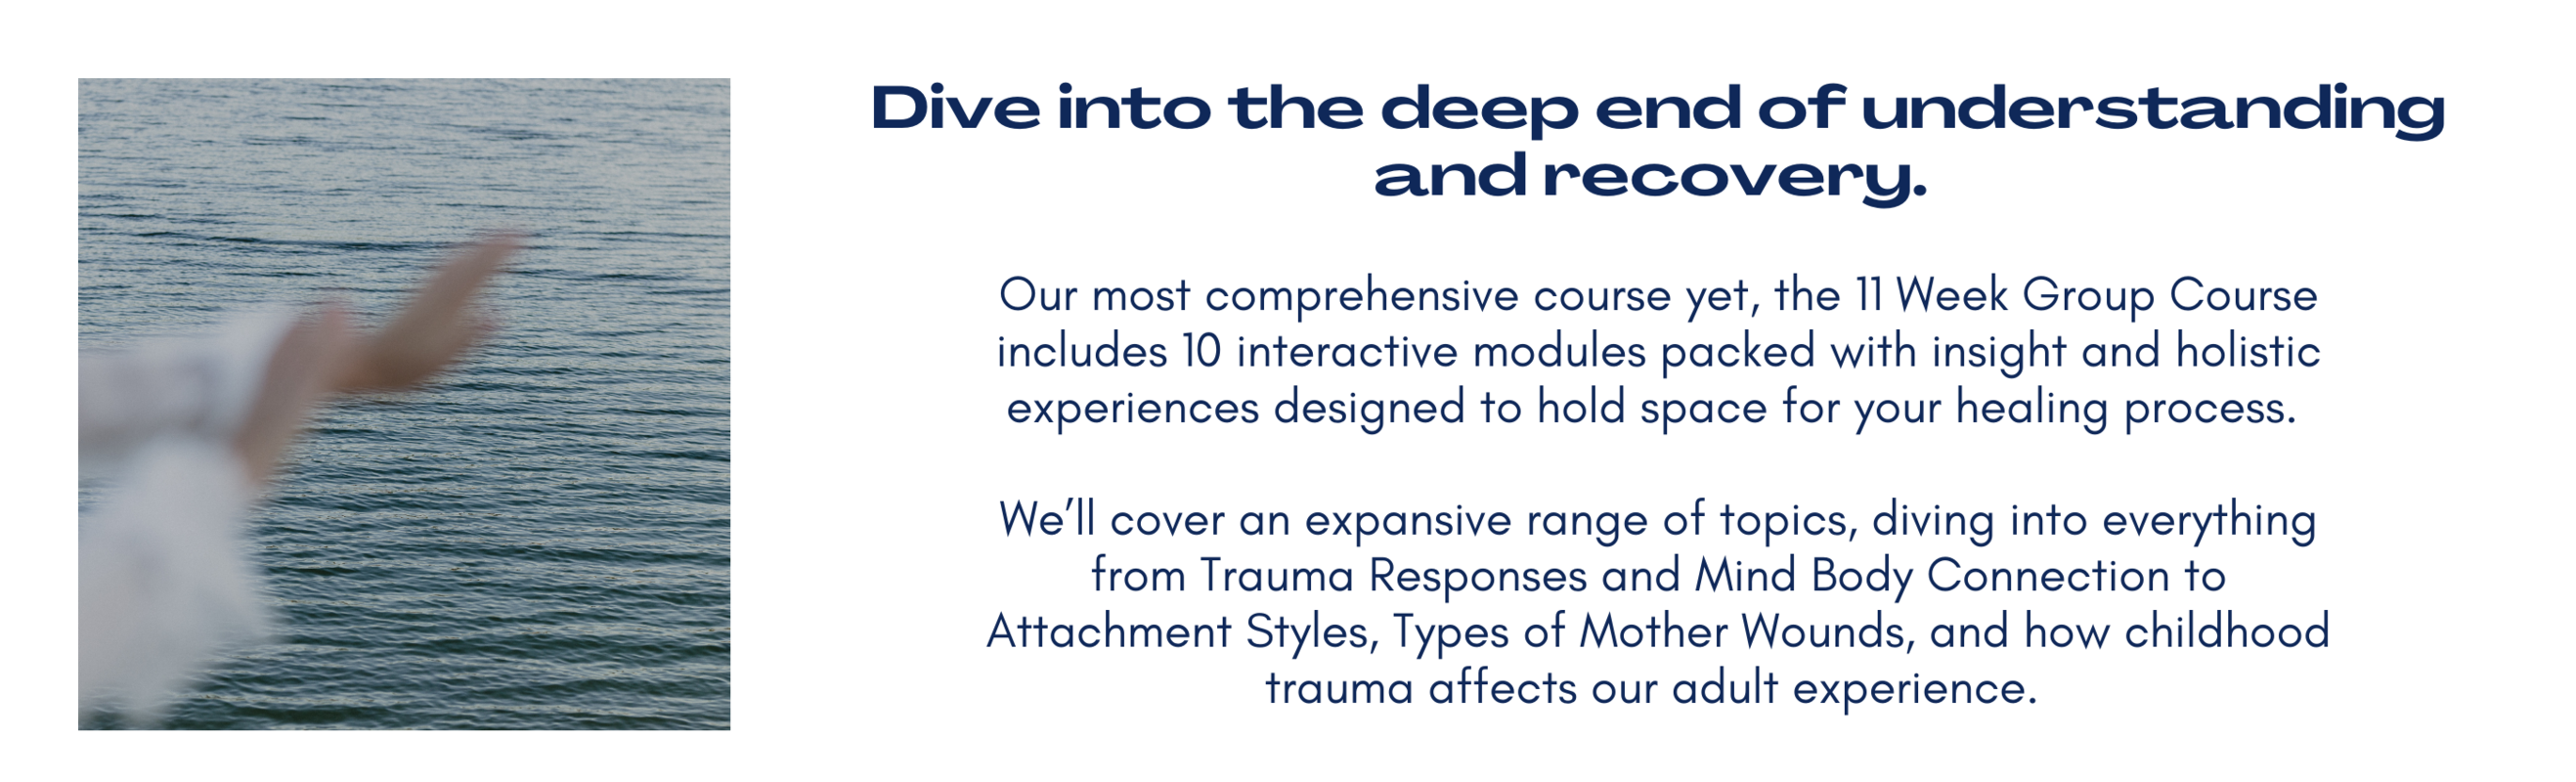 Dive into the deep end of understanding and recovery